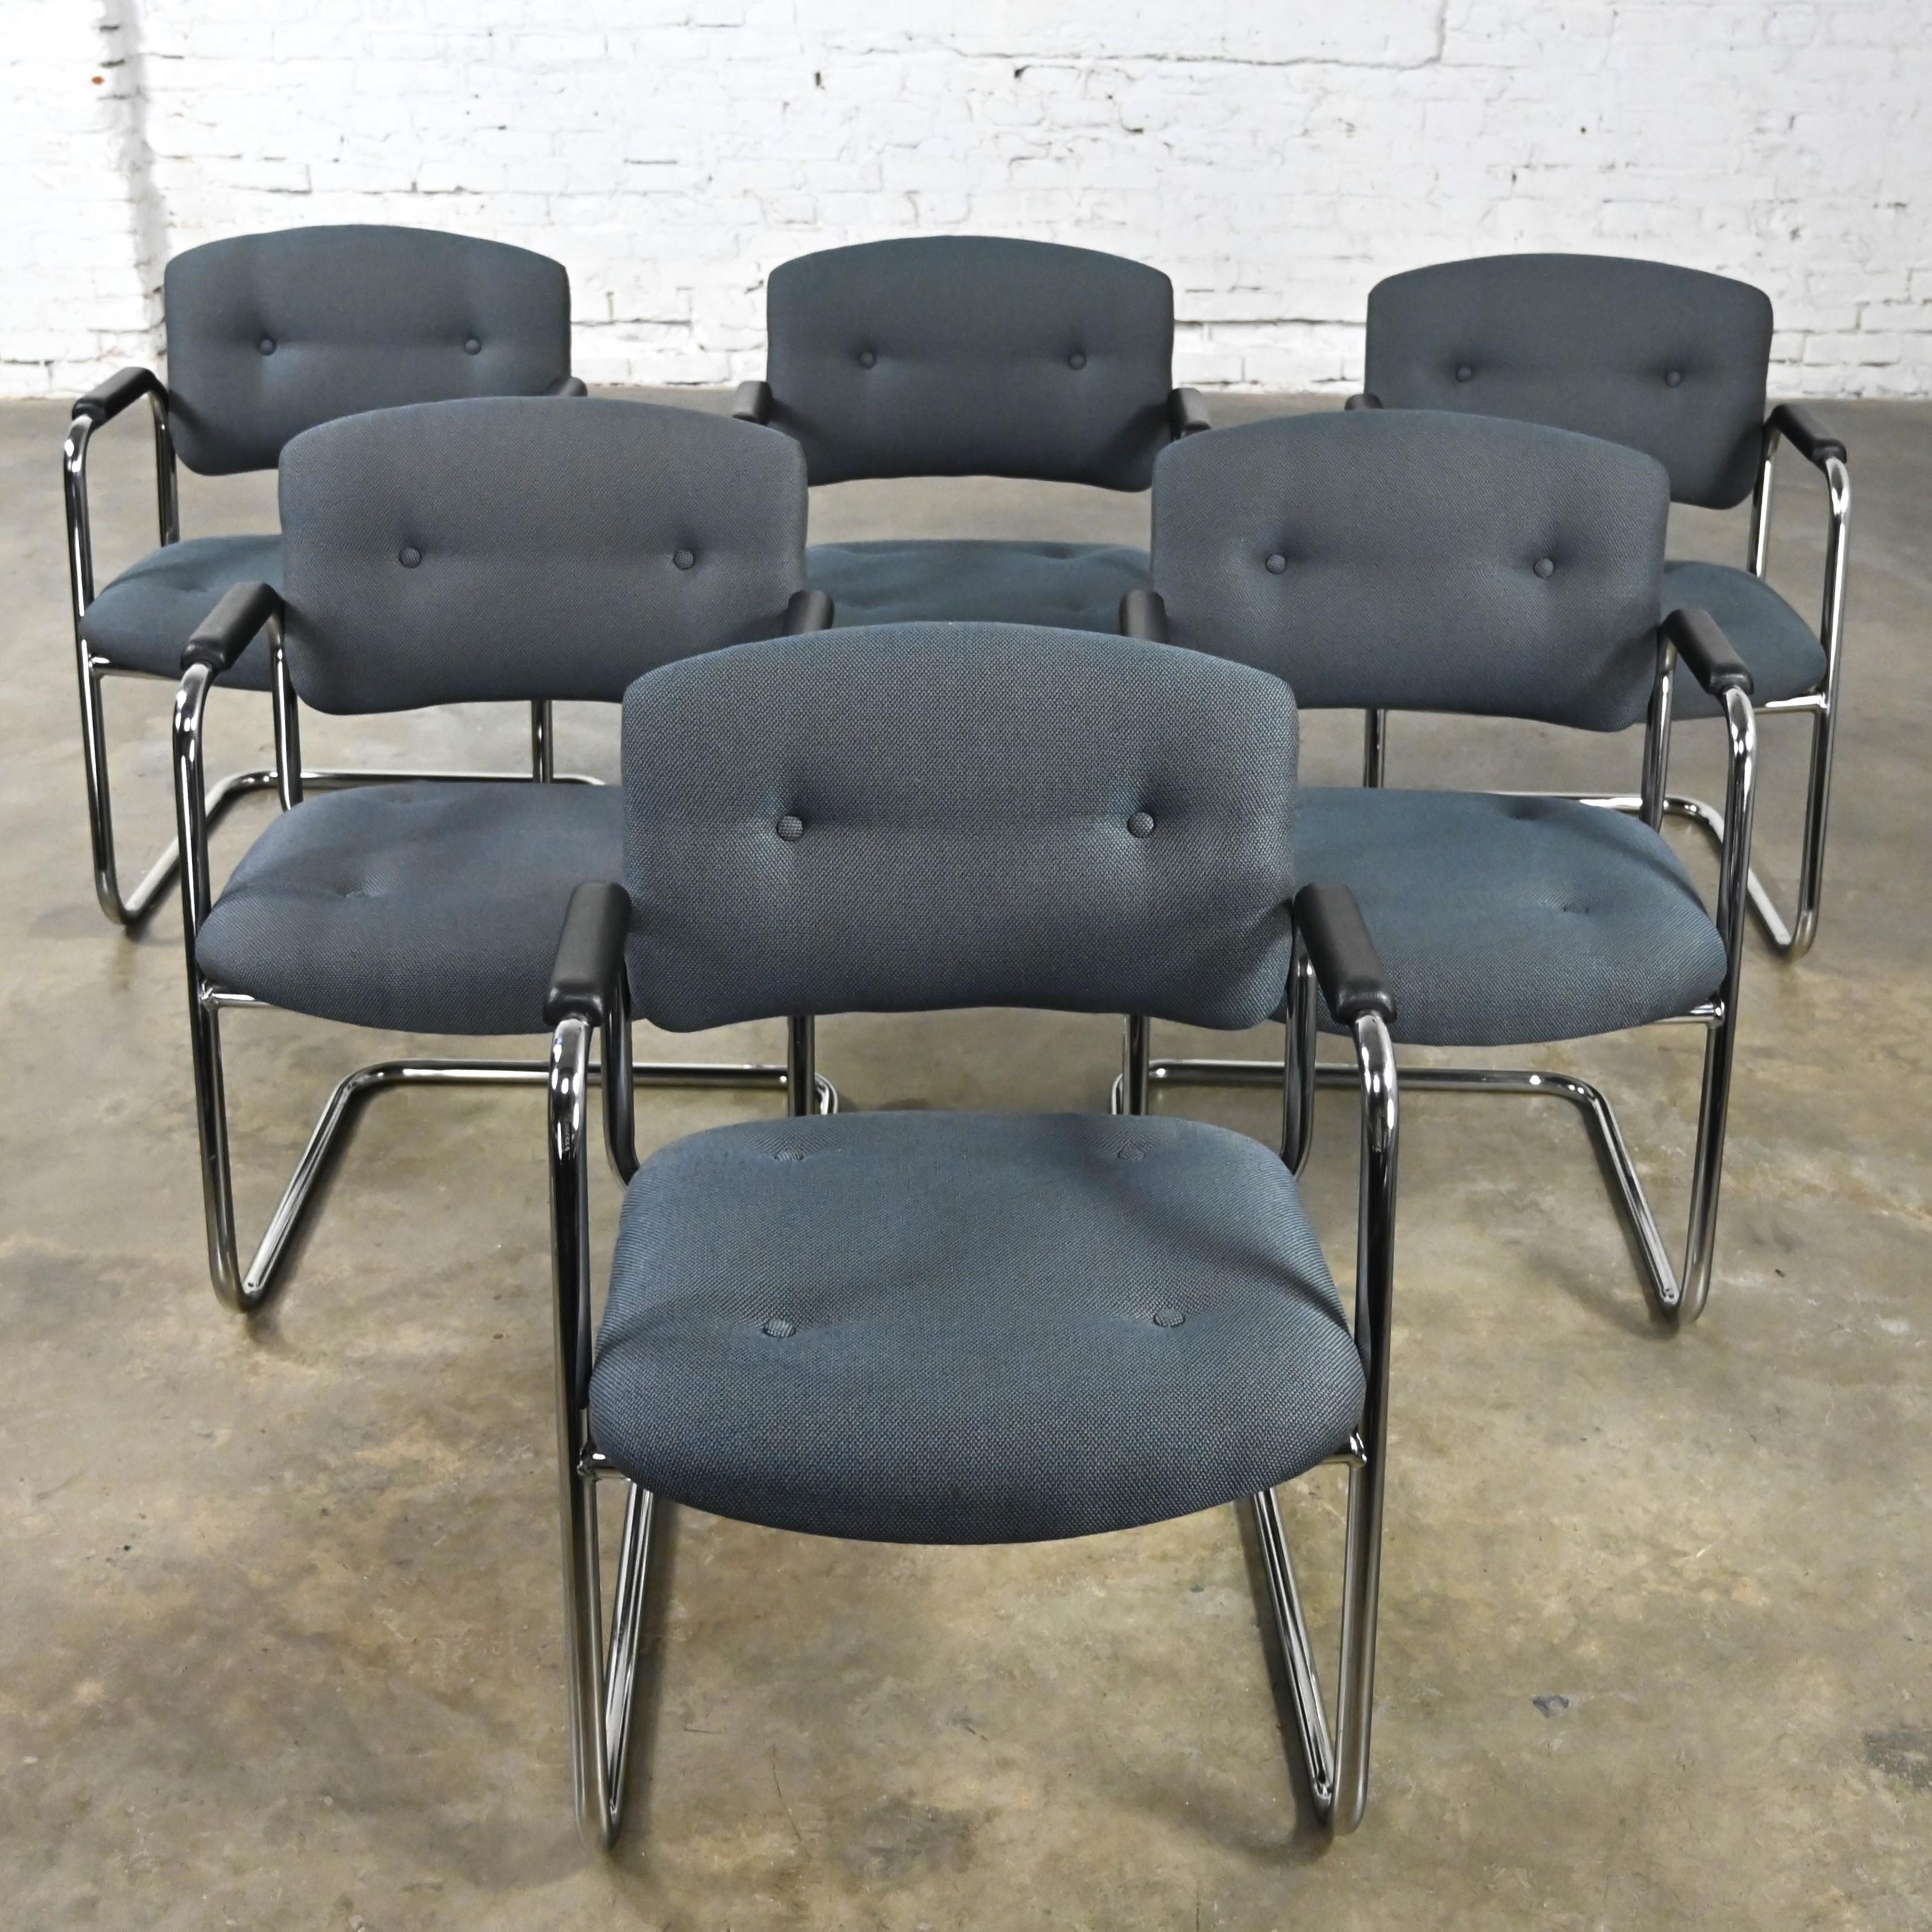 Late 20th Century Gray & Chrome Cantilever Chairs Style Steelcase Set of 6 For Sale 7